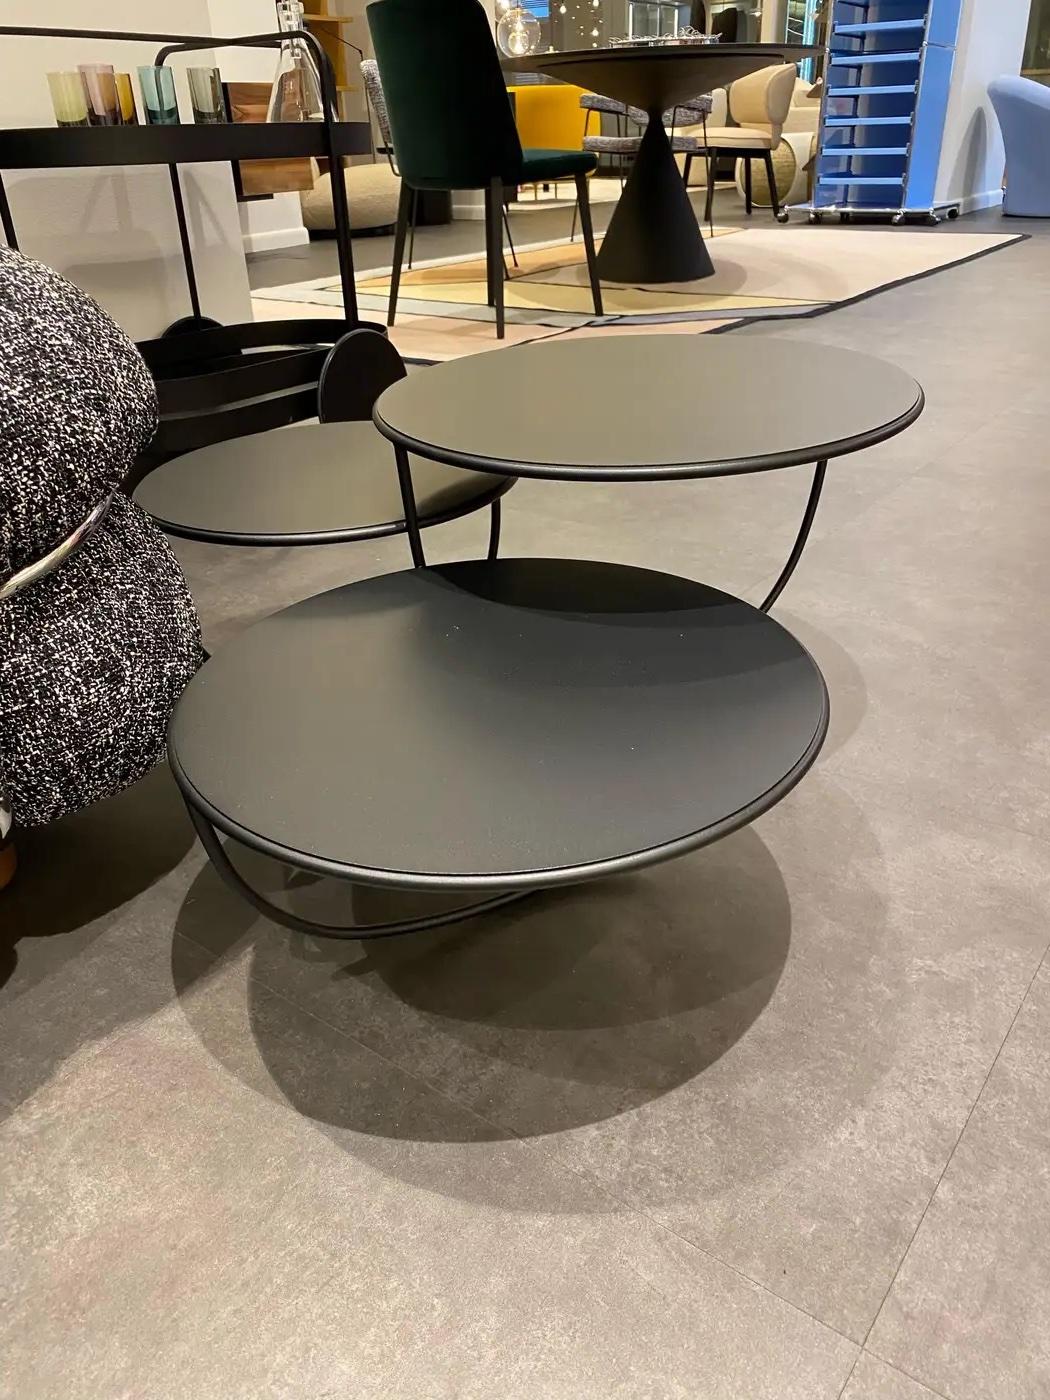 At first sight, Trio is a side table that consists of three transparent bowls overlapping one another. The opening of each bowl is covered with either a glass, metal or wood top. The shape of the bowl is suggested by a single curved line — seemingly